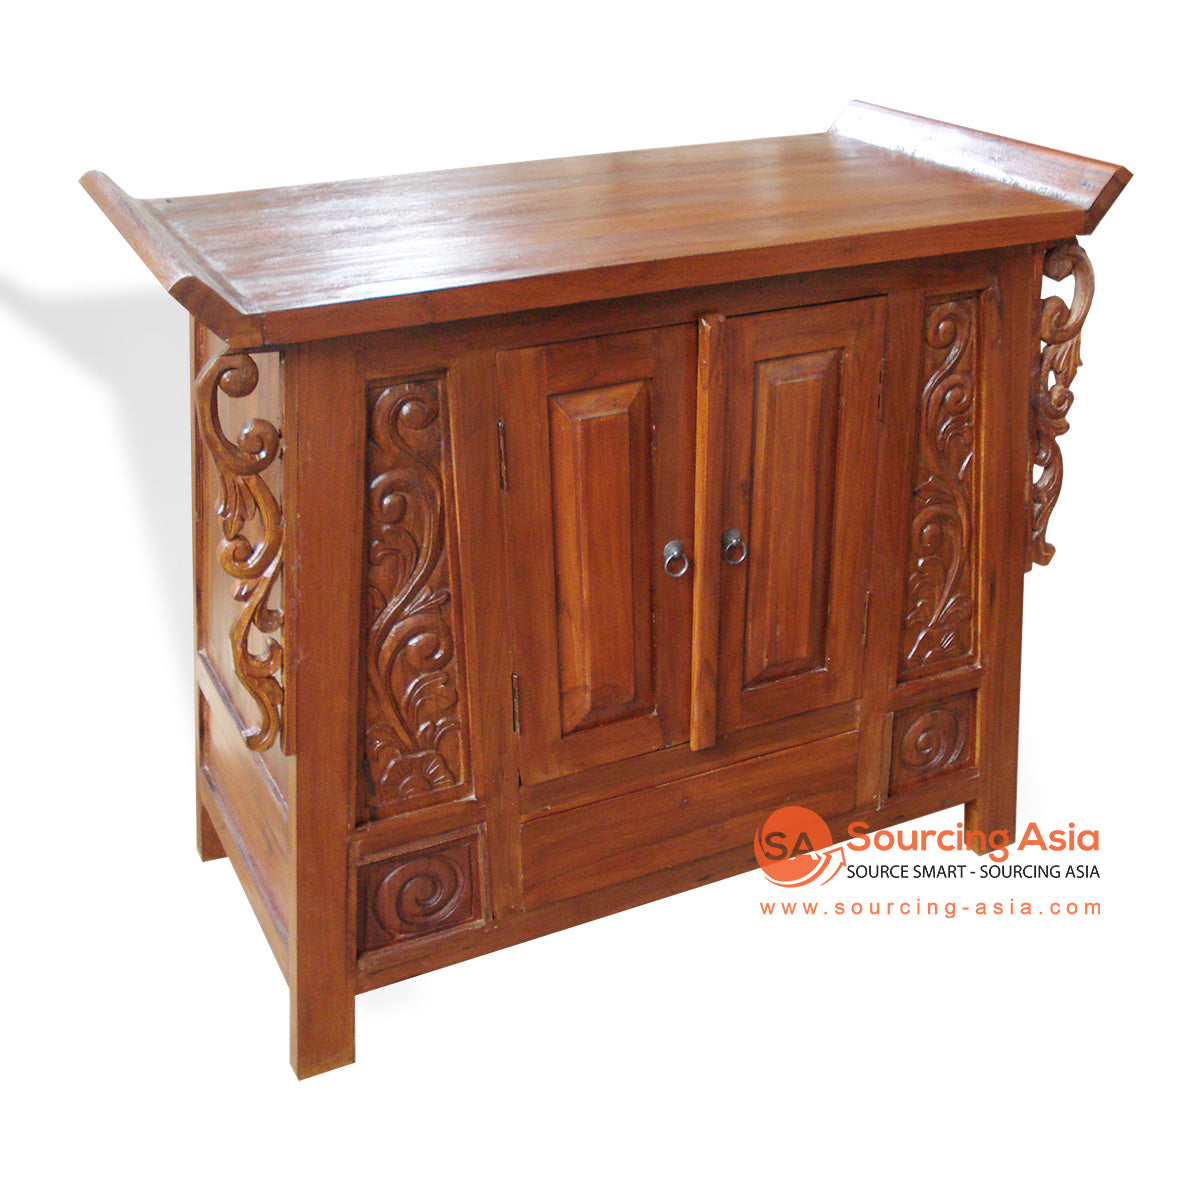 TR00106 NATURAL RECYCLED TEAK WOOD TWO DOORS AND ONE DRAWER SMALL SPACE BUFFET